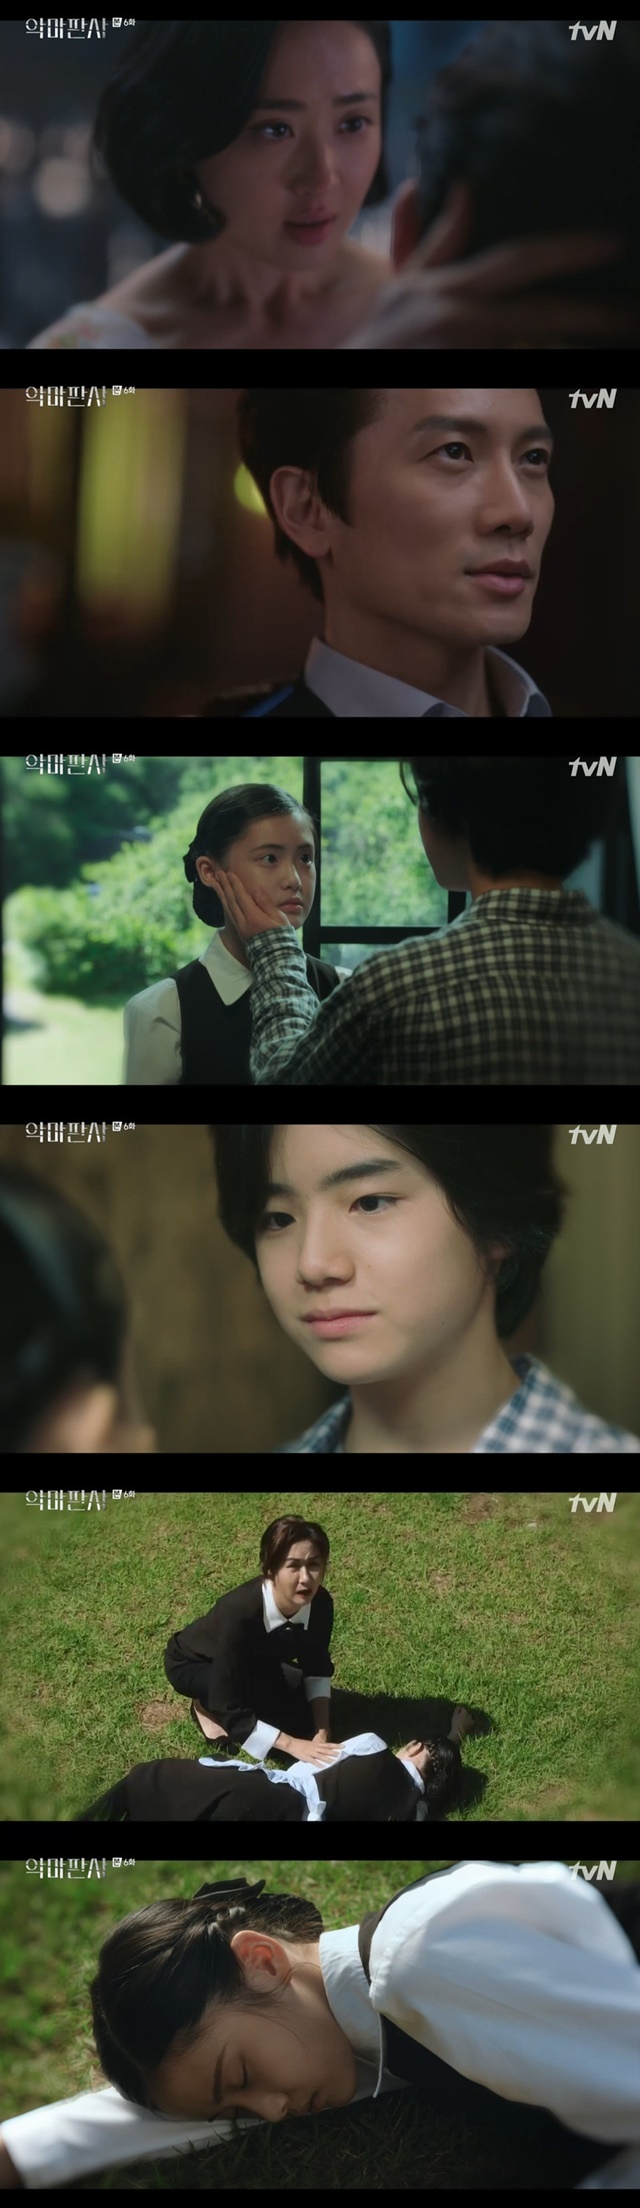 Past history of Kim Min-jung and Ji Sung has been revealed.In the 6th episode of TVNs Saturday Drama The Devil Judge (playplayed by Moon Yoo-seok/directed by Choi Jung-gyu), which was broadcast on July 18, the past history of Kang John (Ji Sung) and Jung Sun-ah (Kim Min-jung) was drawn.Elijah (Chae Eun) told Kim Gaon (Jin Young) that John had made his favorite The Housemaid jump from the second floor.At that time, after being kidnapped by Jung Sun-ah and forced to kiss, John said, I still have a habit of being able to grasp the subject and touching anything.Jung Sun-ah said, Oh my God, are you just getting to know me? Then Jung Sun-ah and Johns past history were drawn.Jung Sun-ah came to The Housemaid at the house of John and said, I lived without knowing that there was a world of such beautiful things.How is Master John so beautiful and handsome?Then, when the river asked, Do you like me? How good is it? Can you jump here? Can you do it for me? Jung Sun-ah jumped off the second floor.Jung Sun-ah said, I was so much, I liked it so much, but his memory was different.